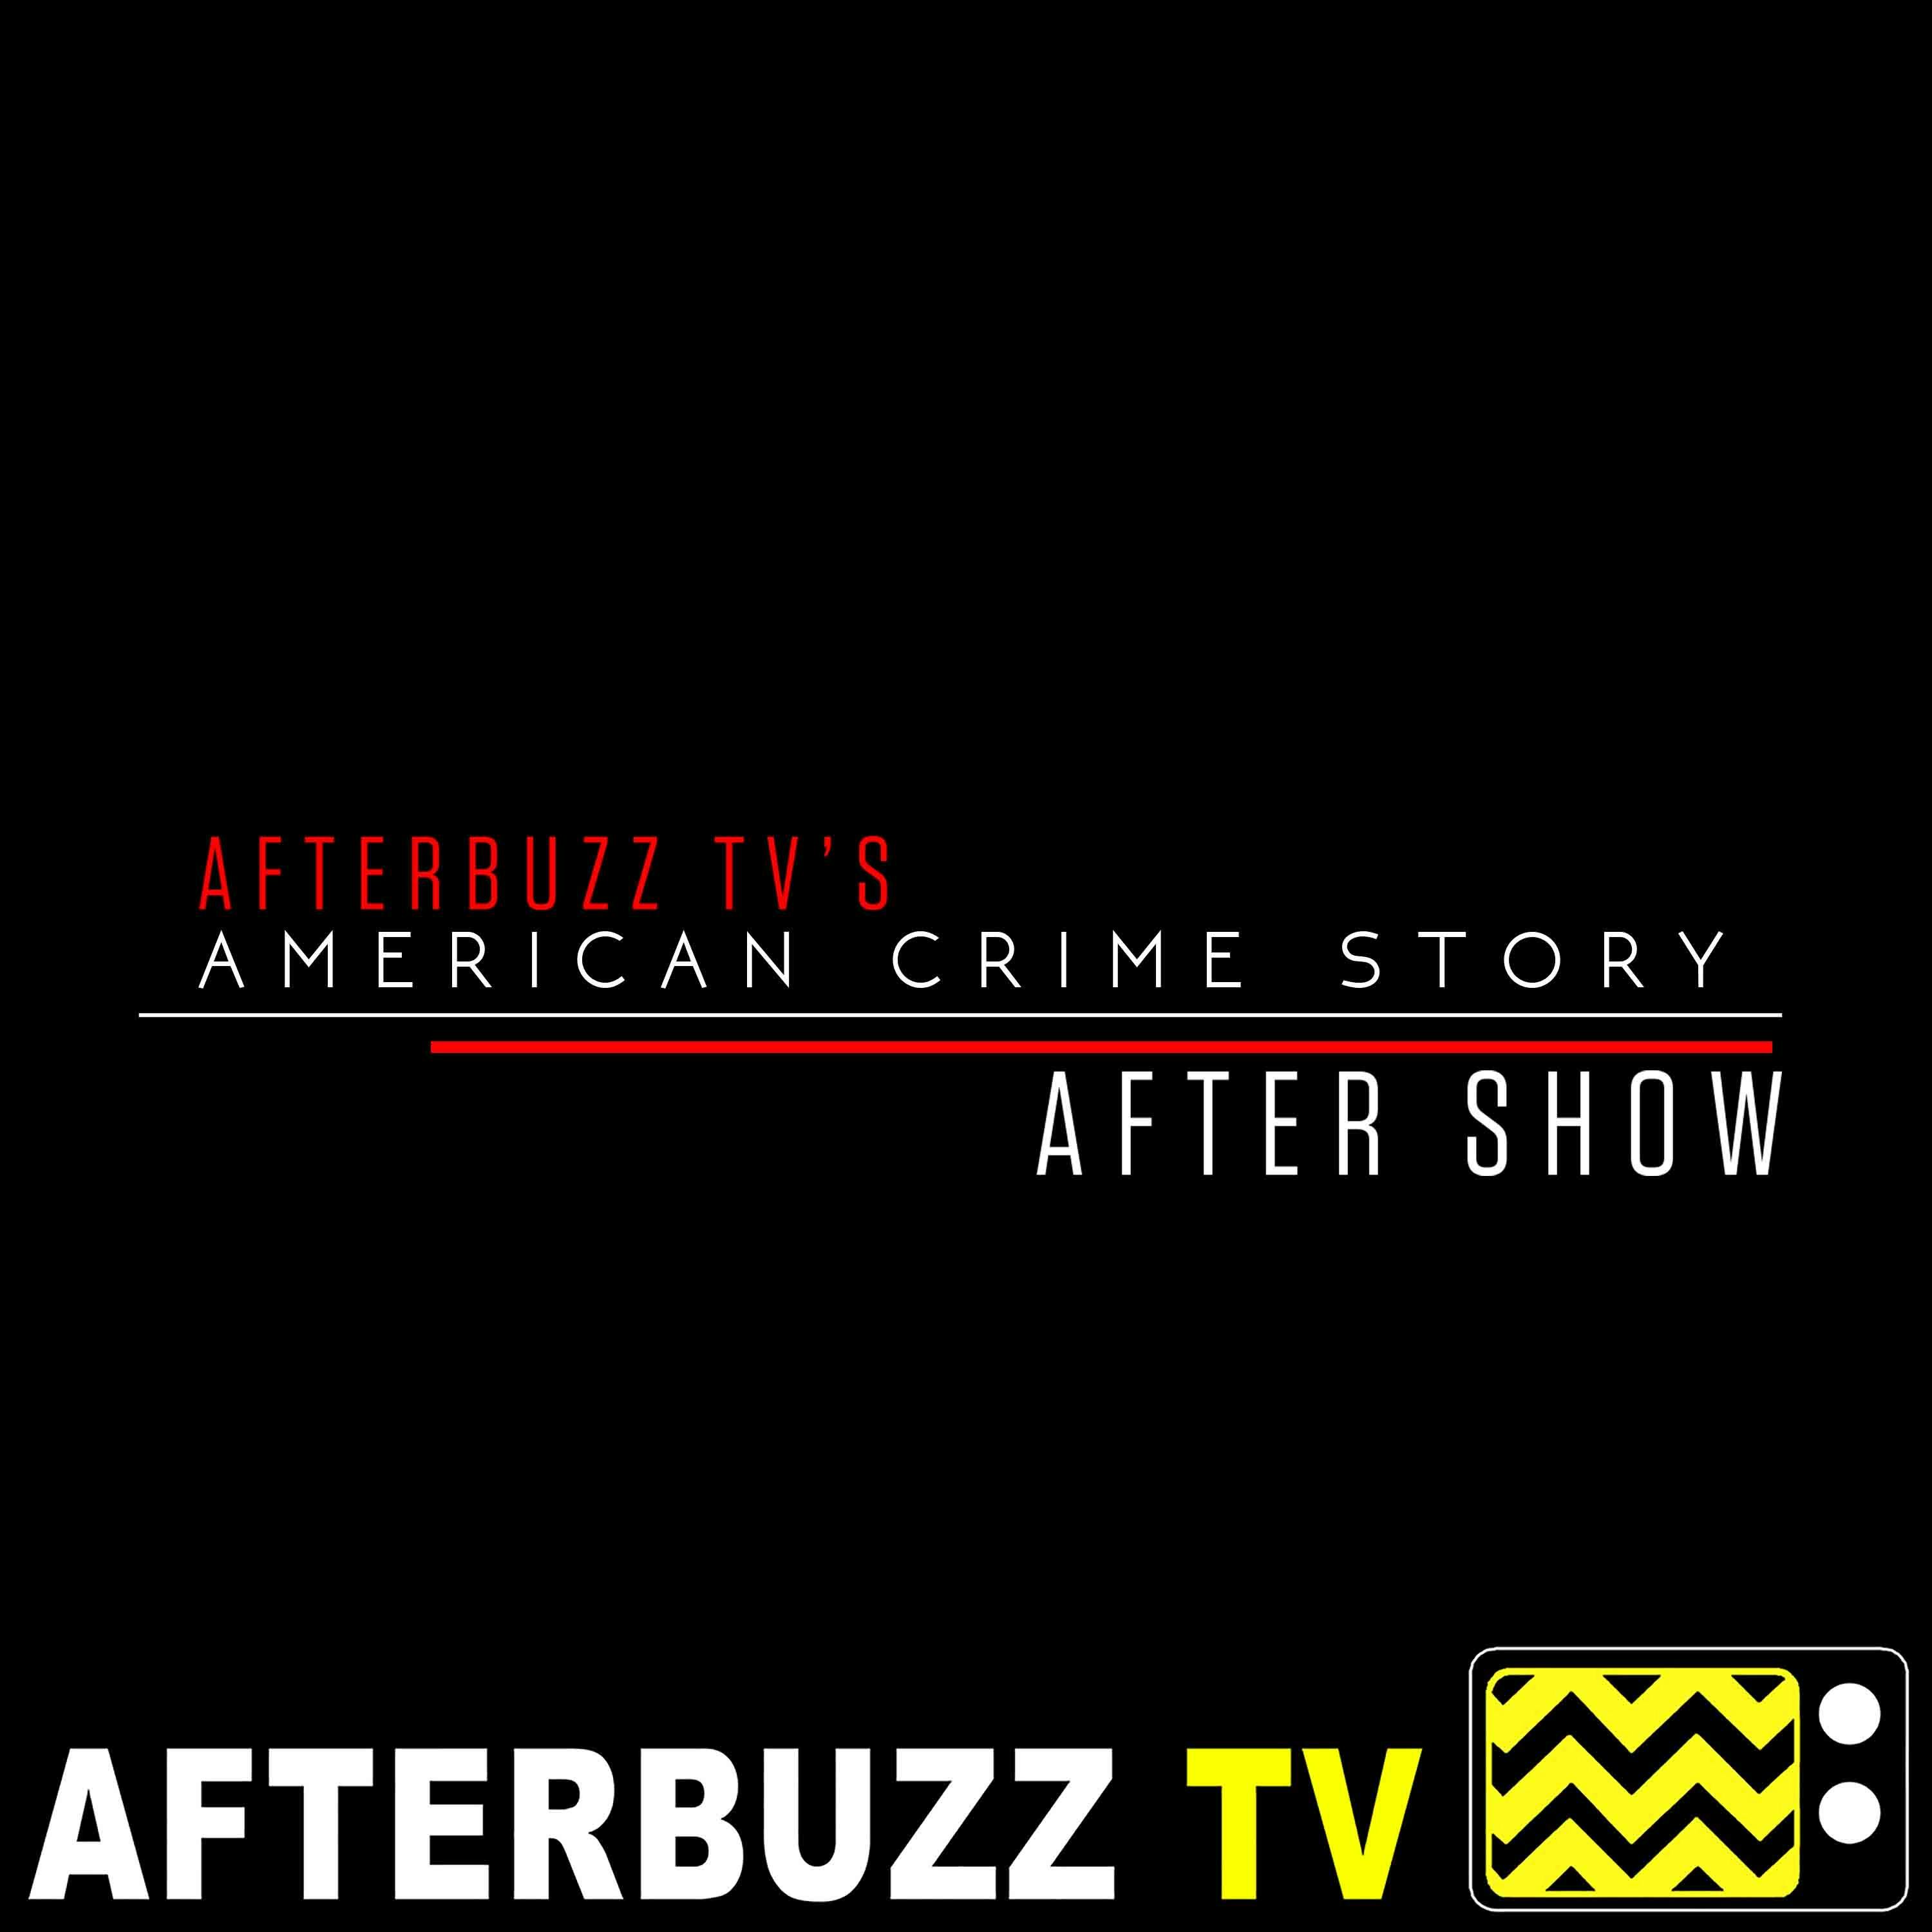 The People vs OJ Simpson | The Run of His Life E:2 | AfterBuzz TV AfterShow